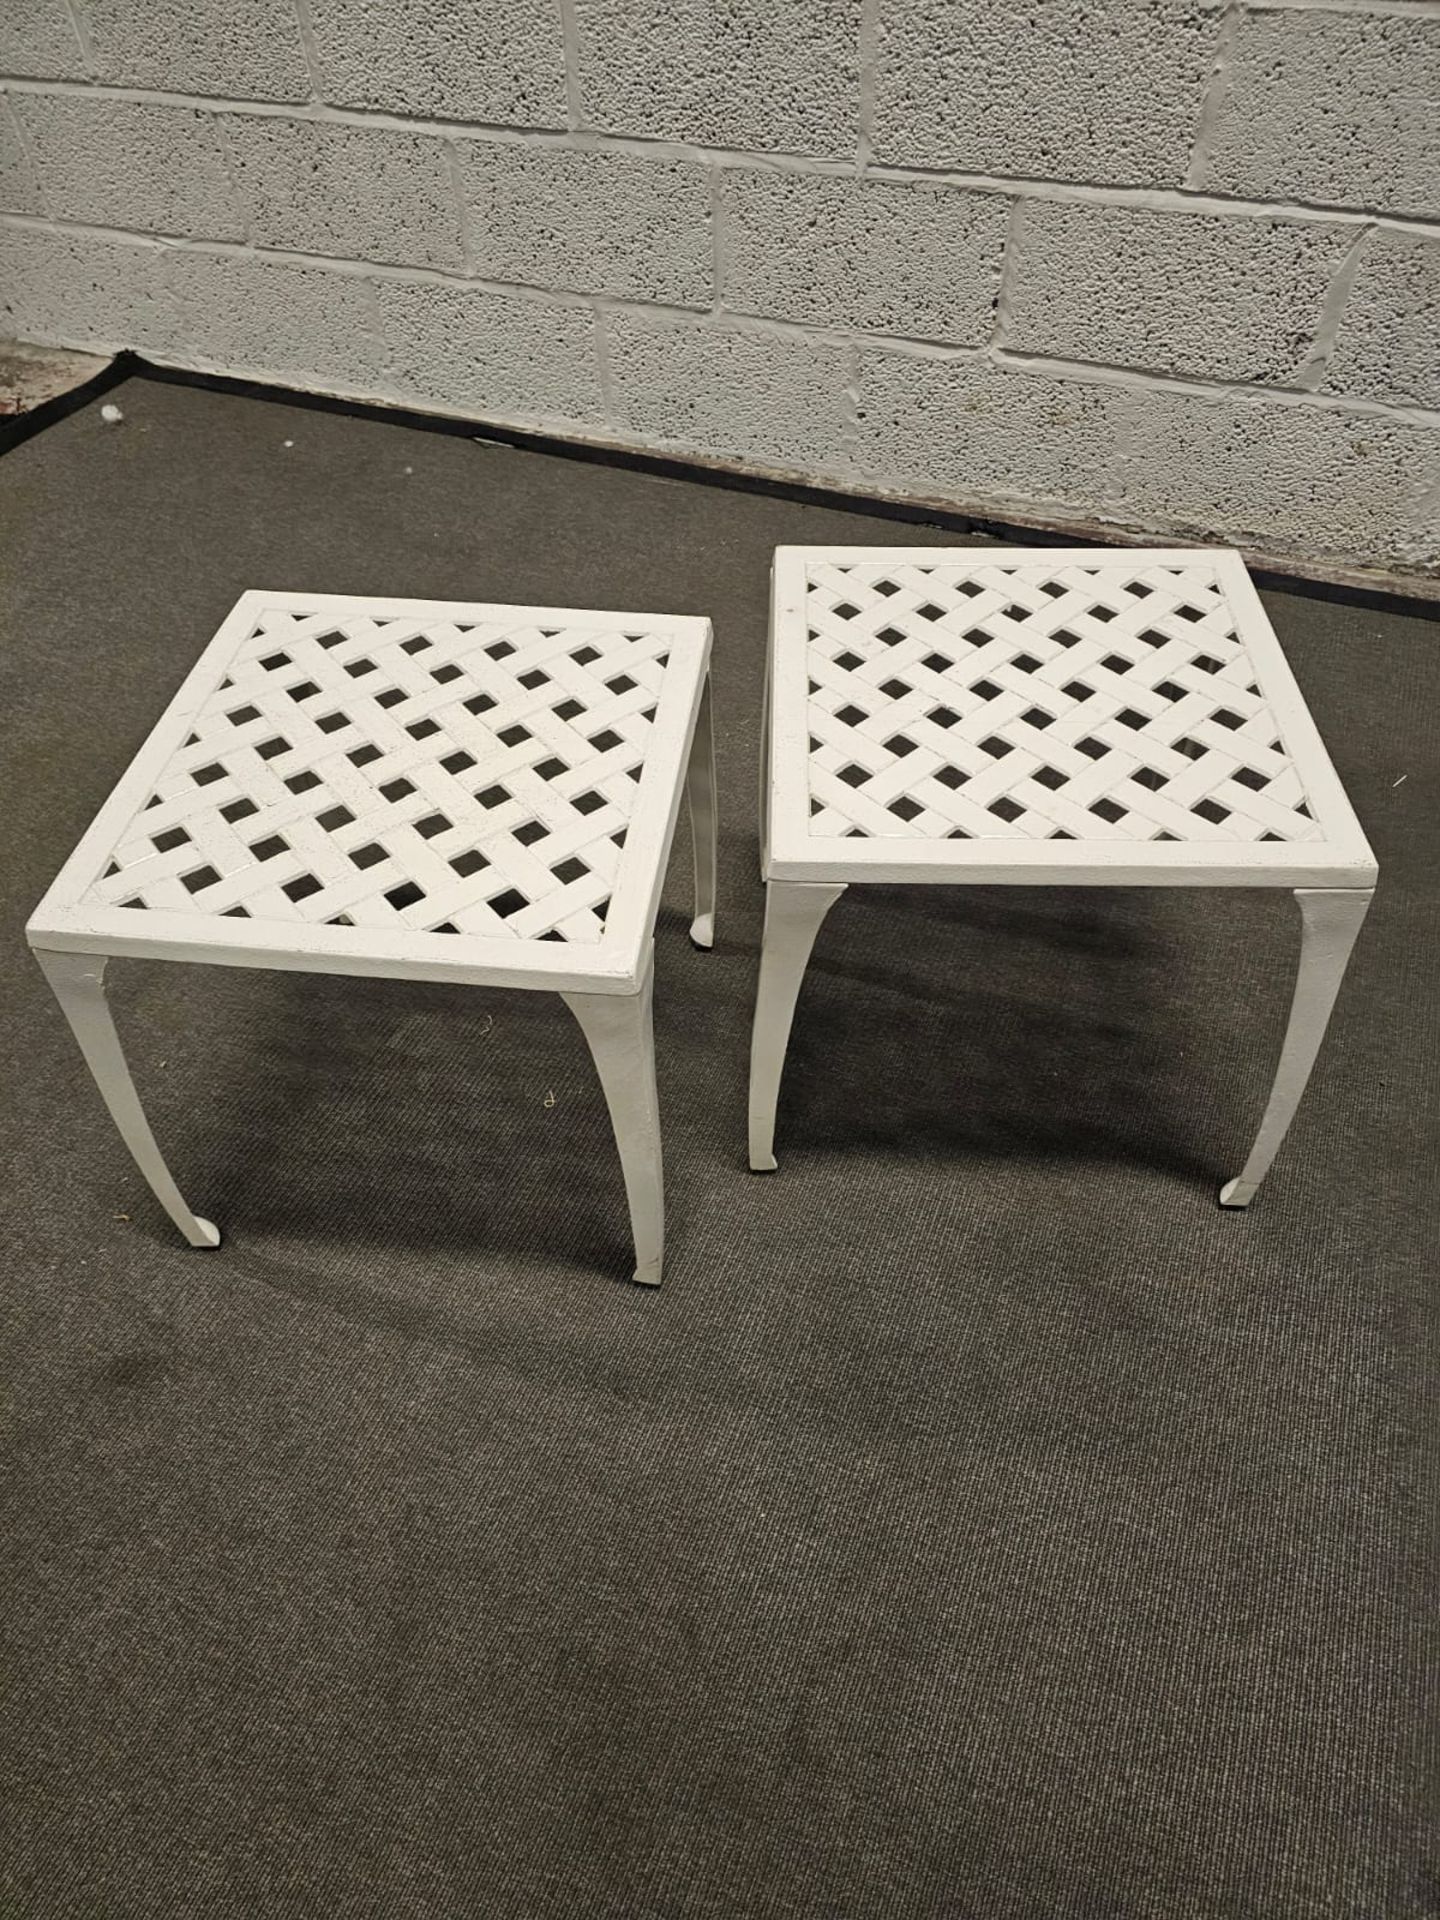 A Pair Of White Metal Painted Side Tables 44 x 44 x 44 Cm